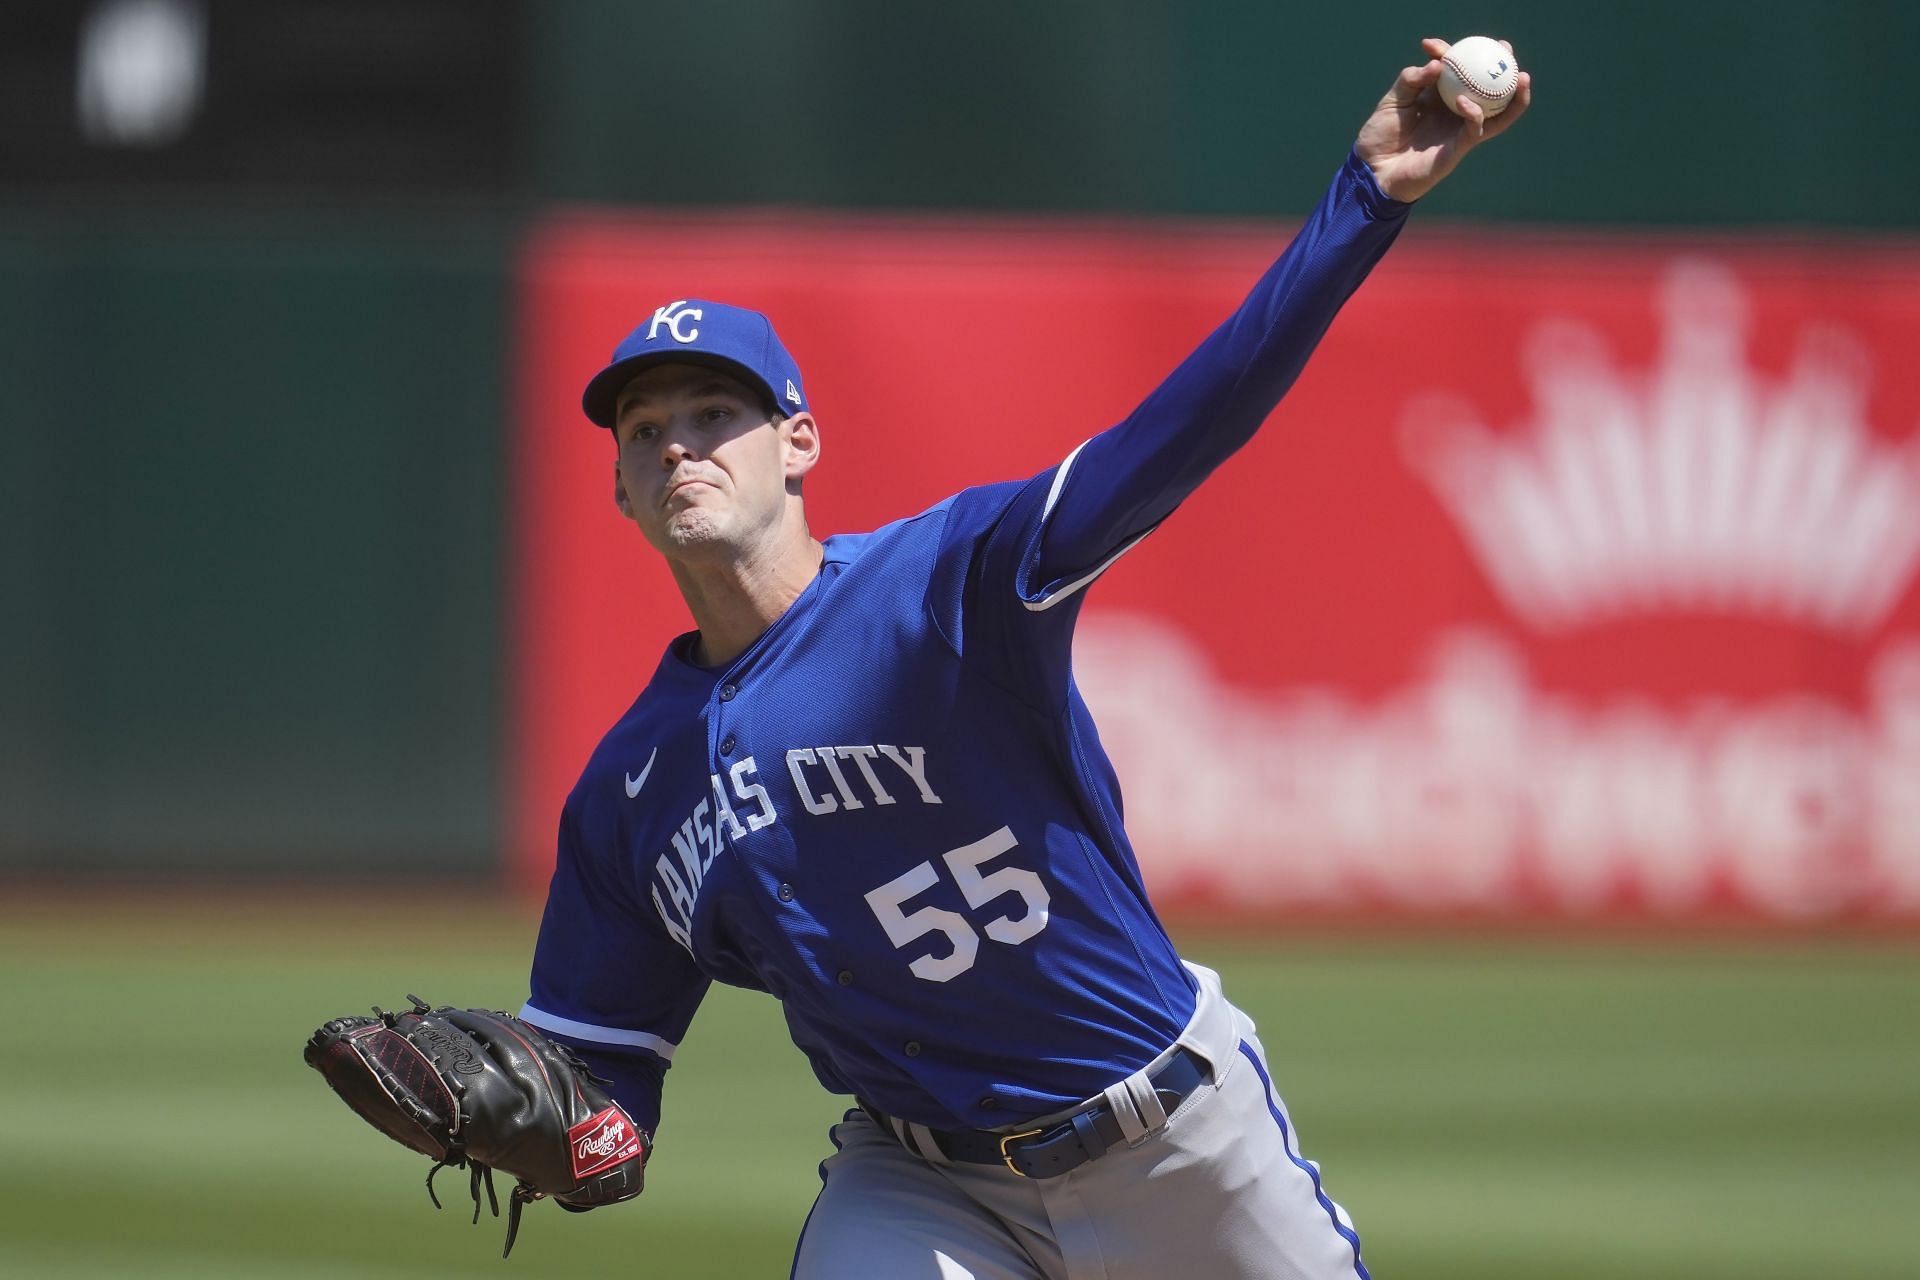 Kansas City Royals pitcher Cole Ragans works against the Oakland Athletics during a game in Oakland